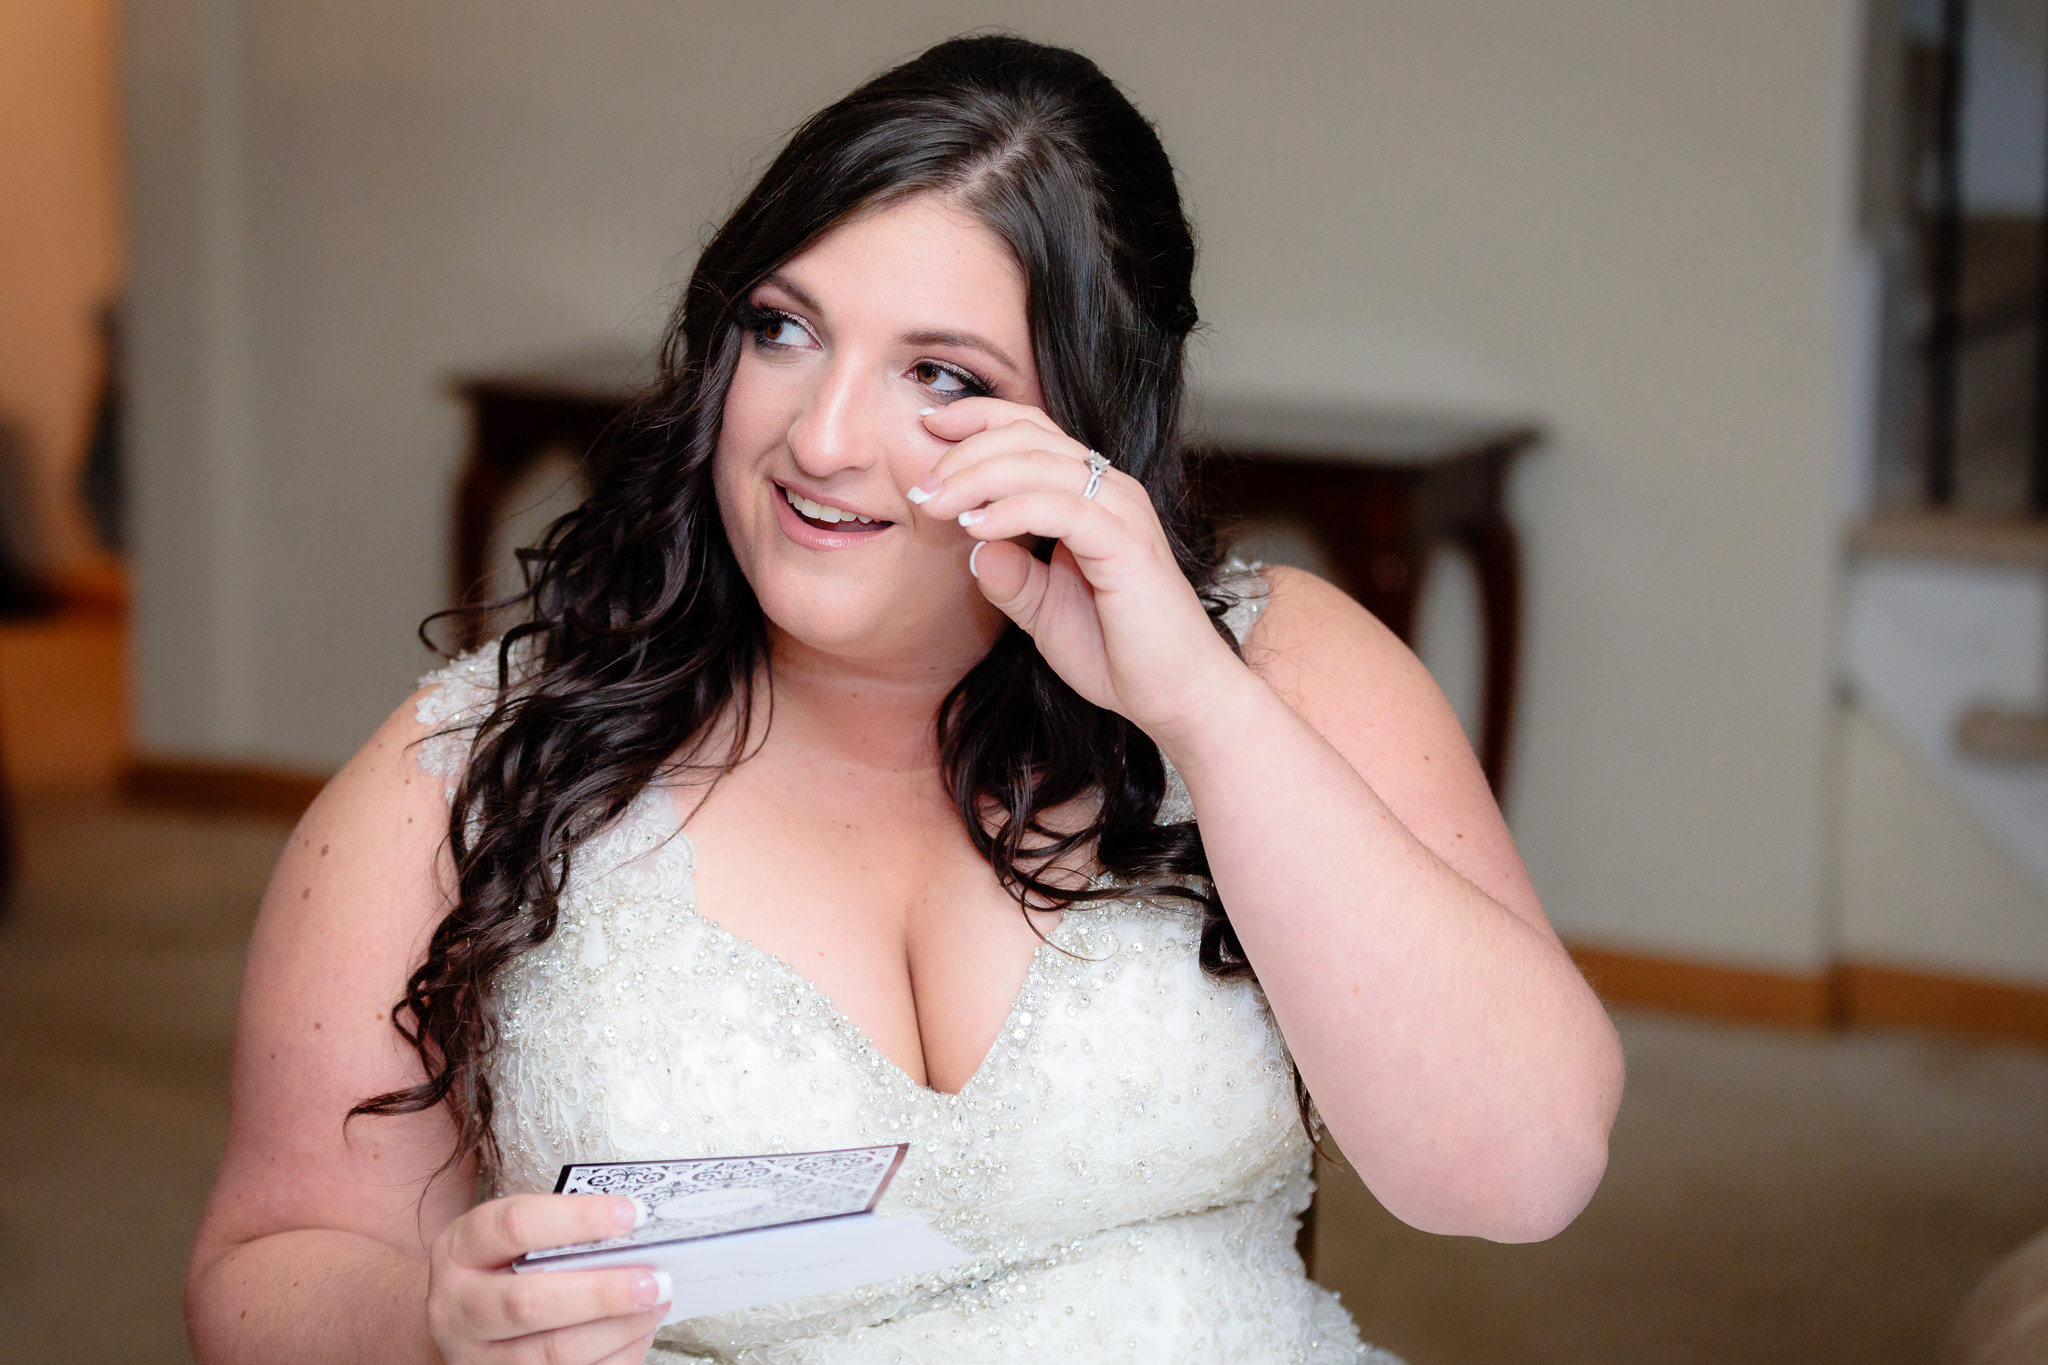 Bride wipes a tear from her eye as she reads a letter from her groom